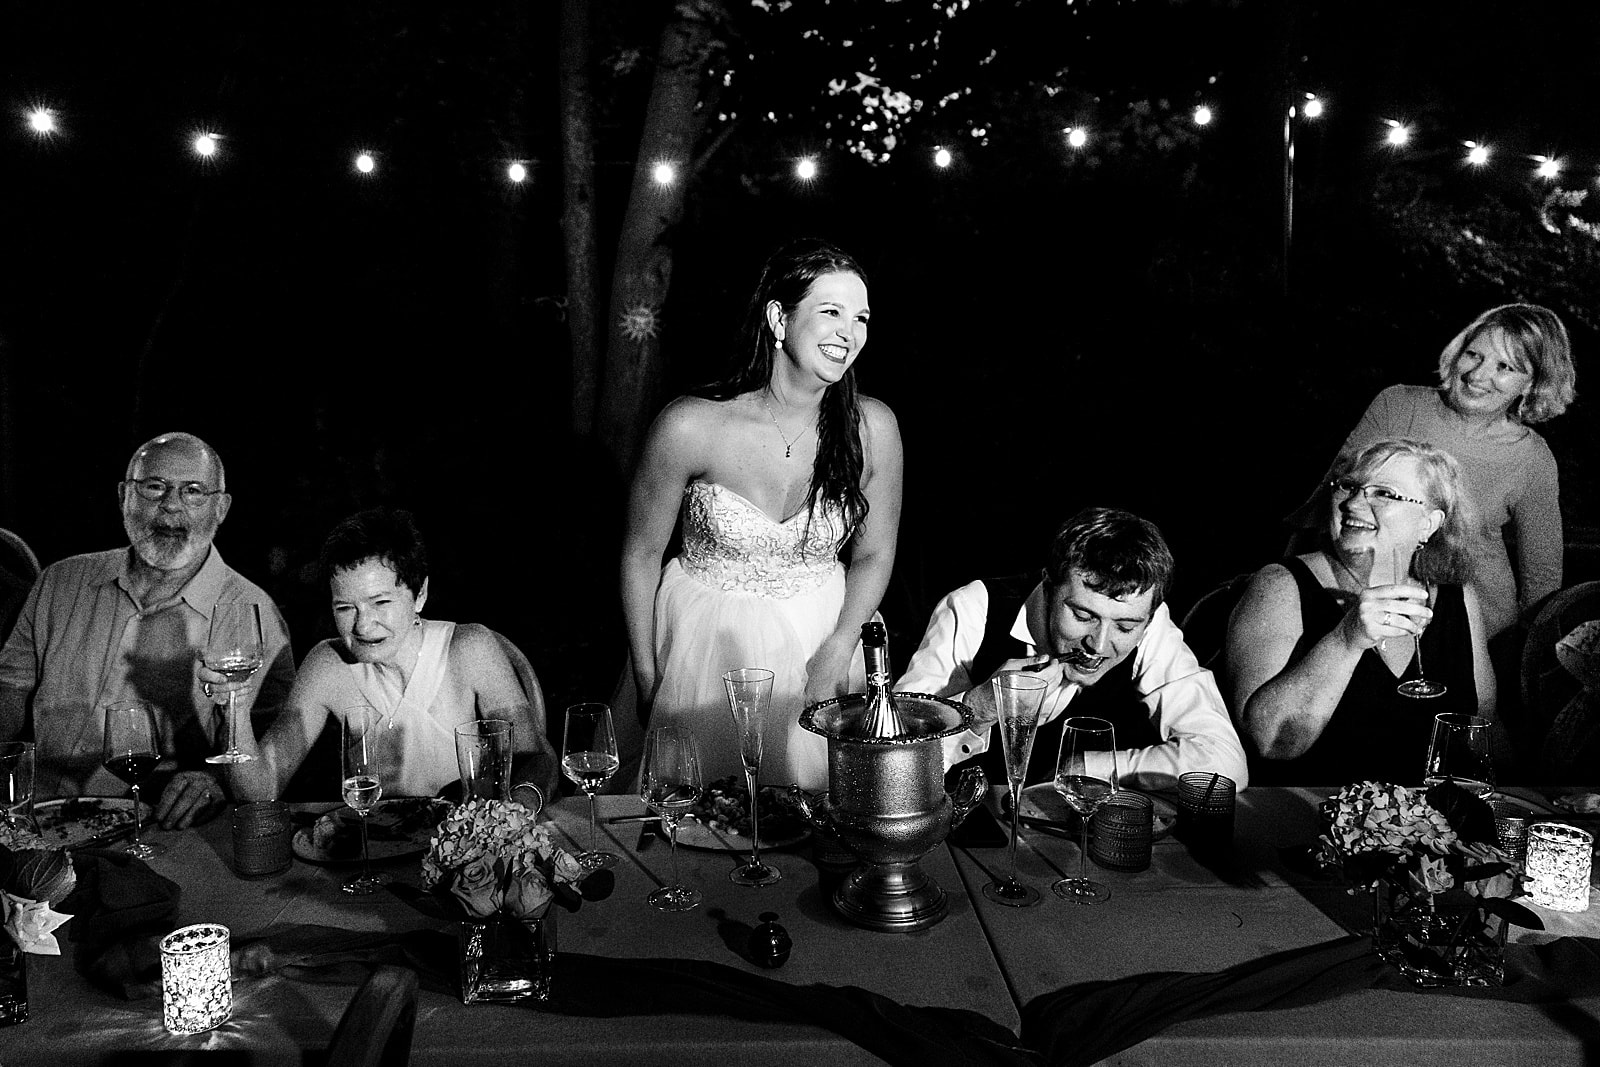 If you're having an al fresco wedding reception, make sure you get a photographer who knows how to light up the dark